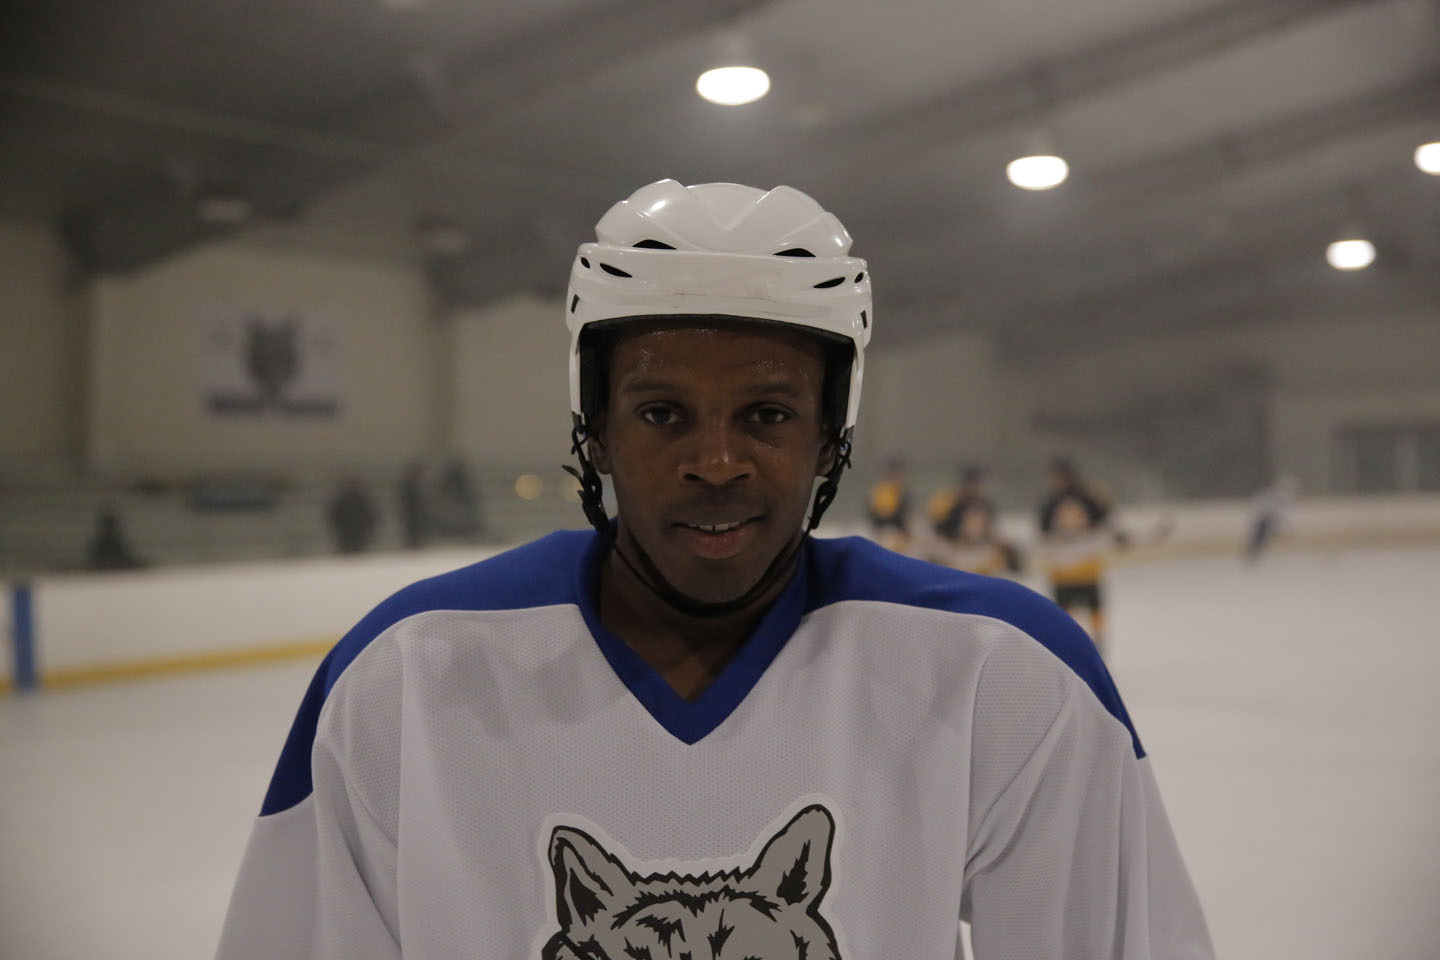 NHL Players of Color Speak Out Against Racism in Powerhouse Ad